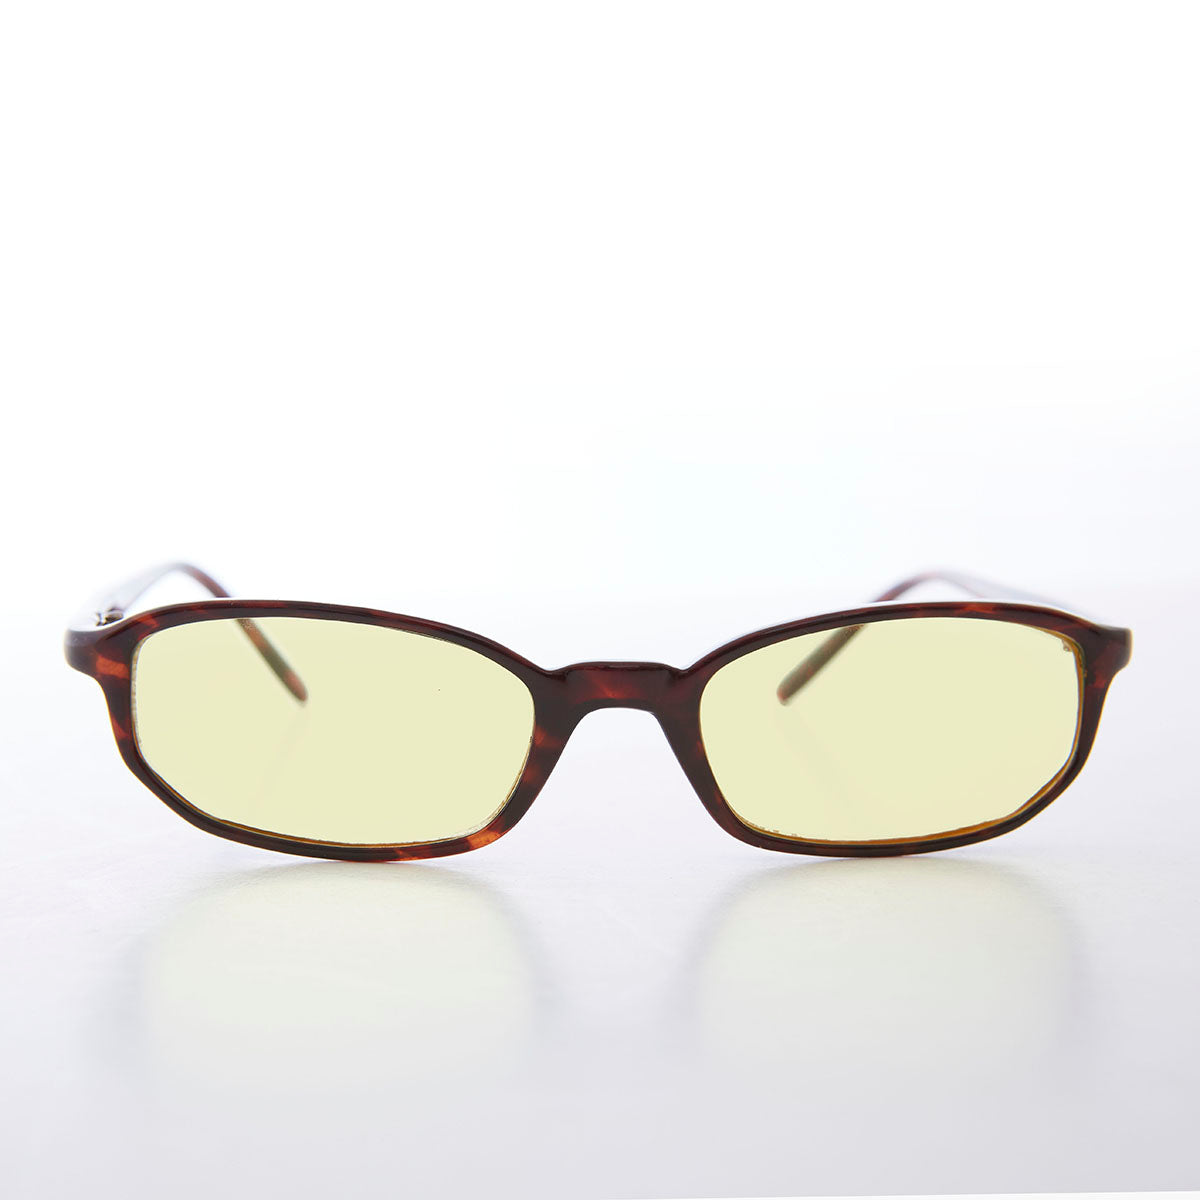 small rectangle tortoise frame sunglasses with yellow lenses